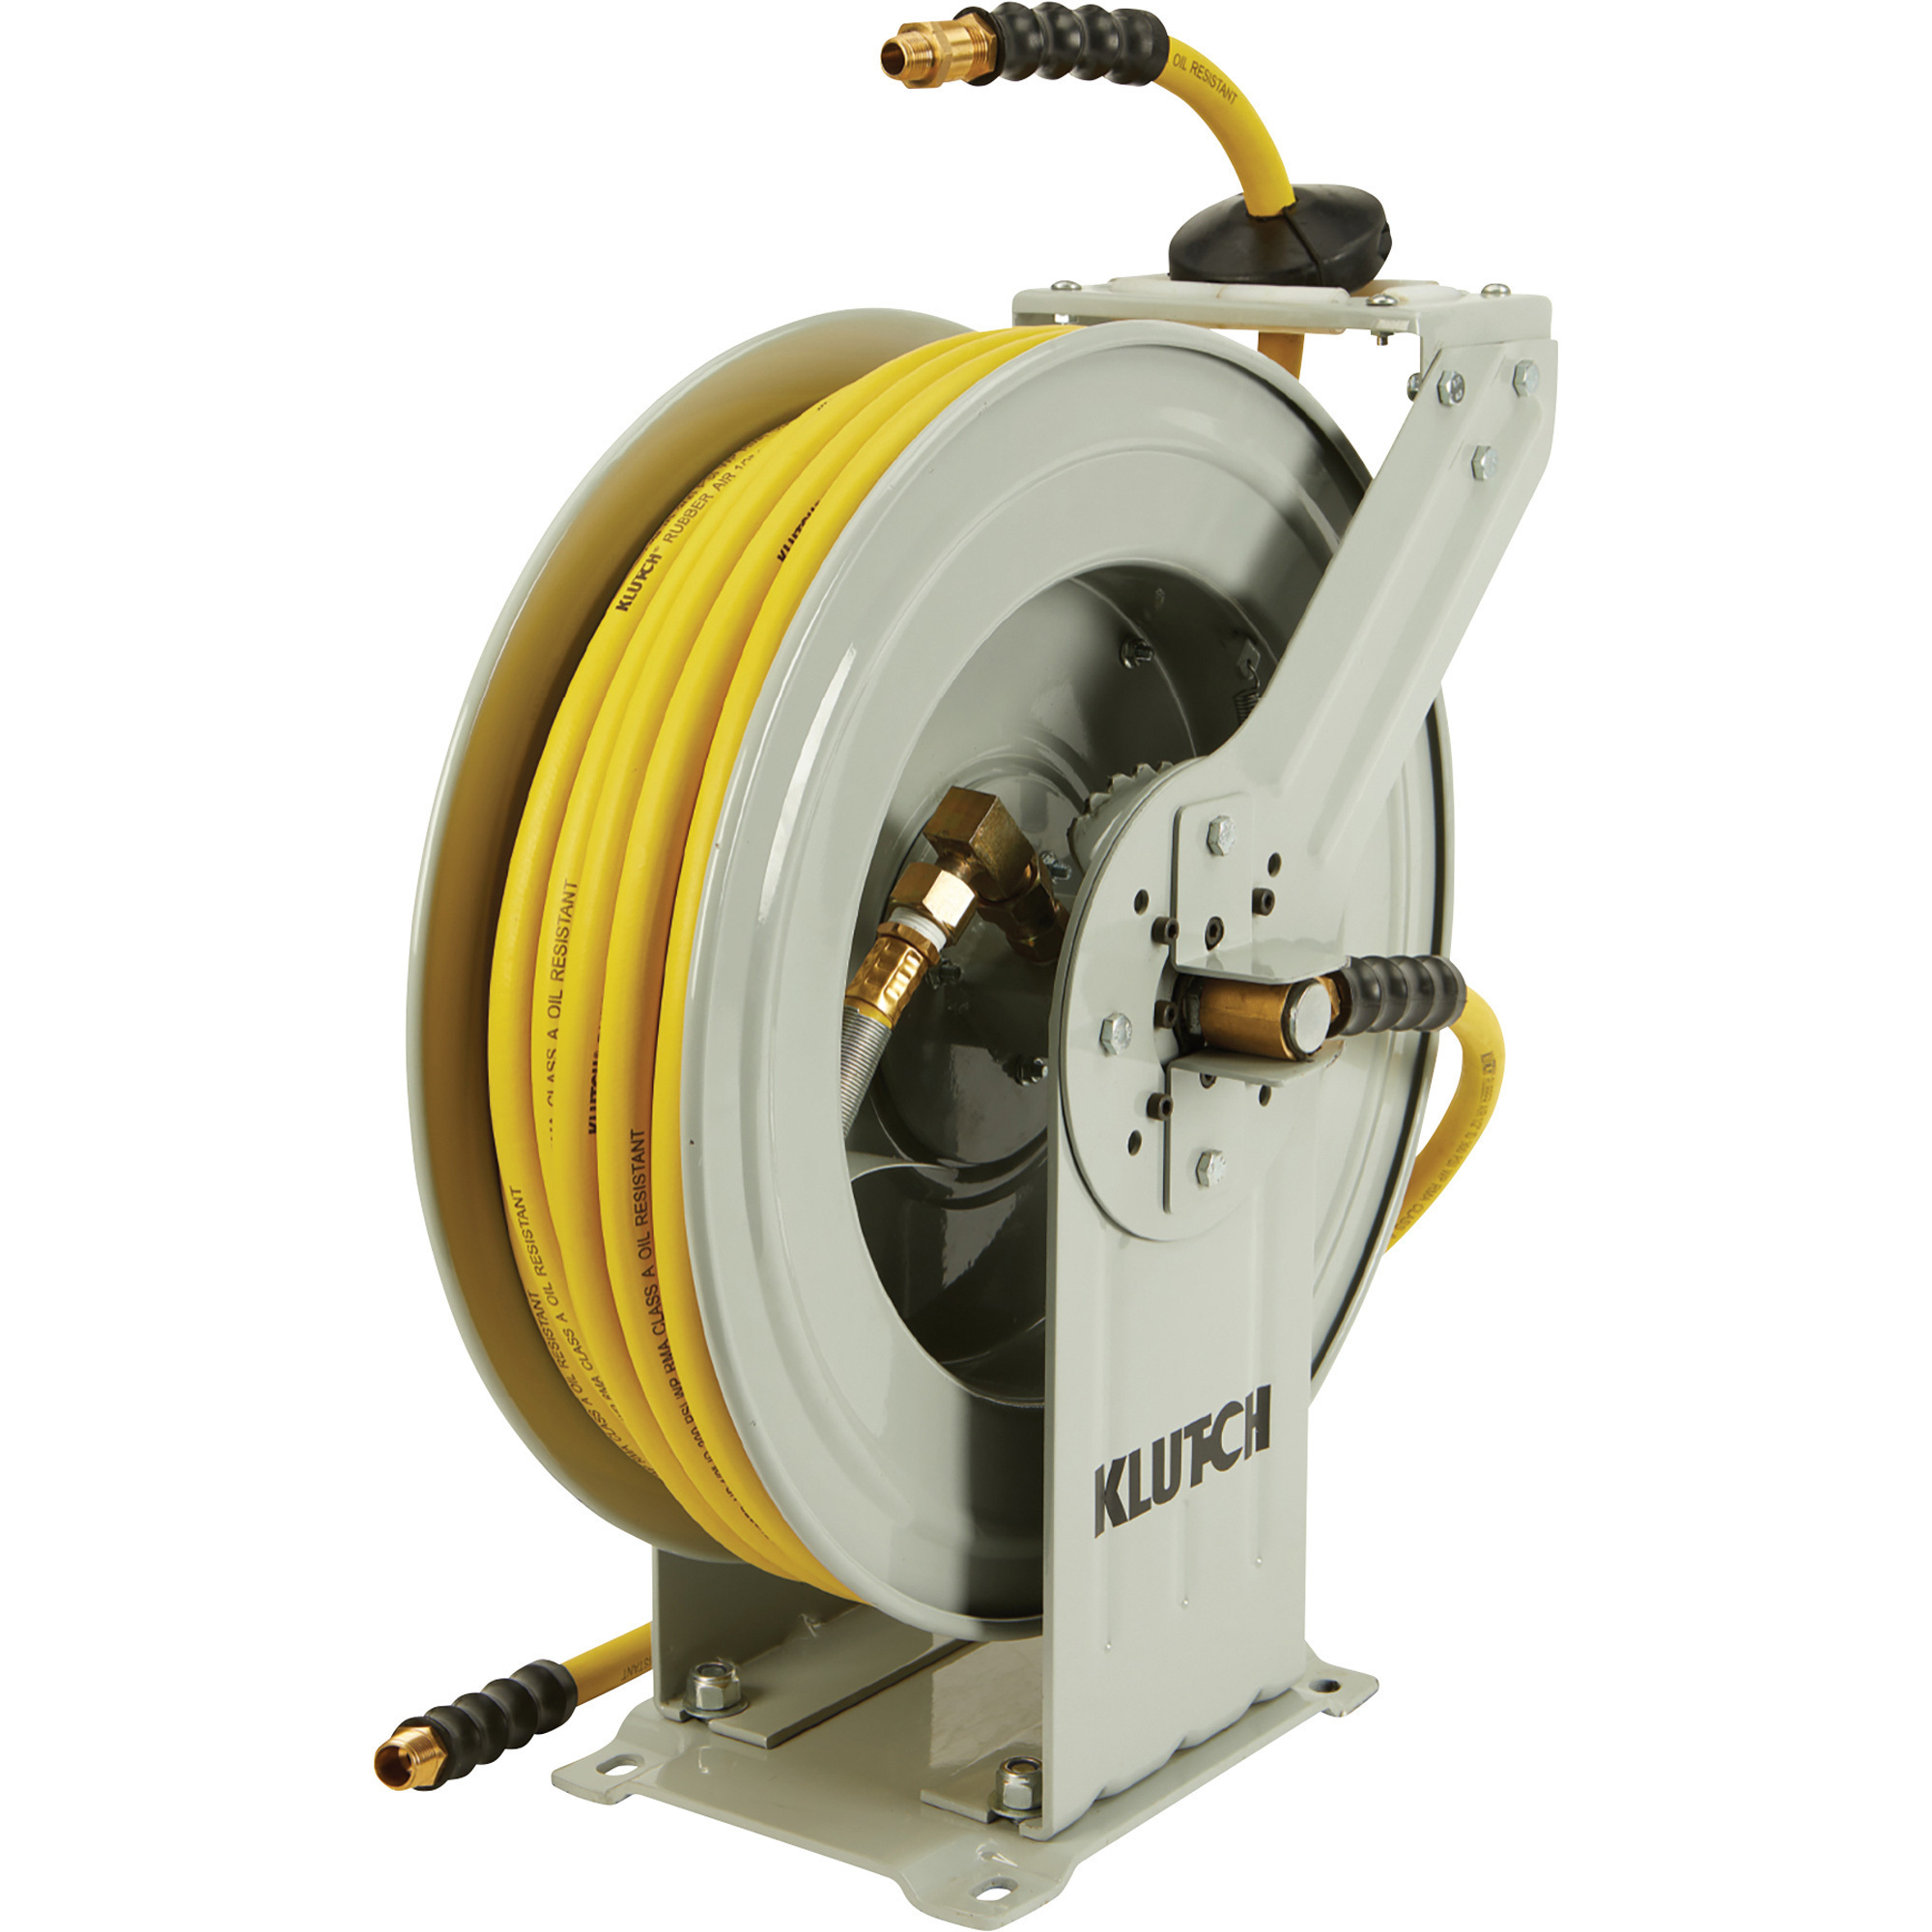 Klutch Auto-Rewind Air Hose Reel, with 1/2Inch. x 50ft. Oil-Resistant Rubber Hose, 300 PSI, Model OSRDA1250-NT